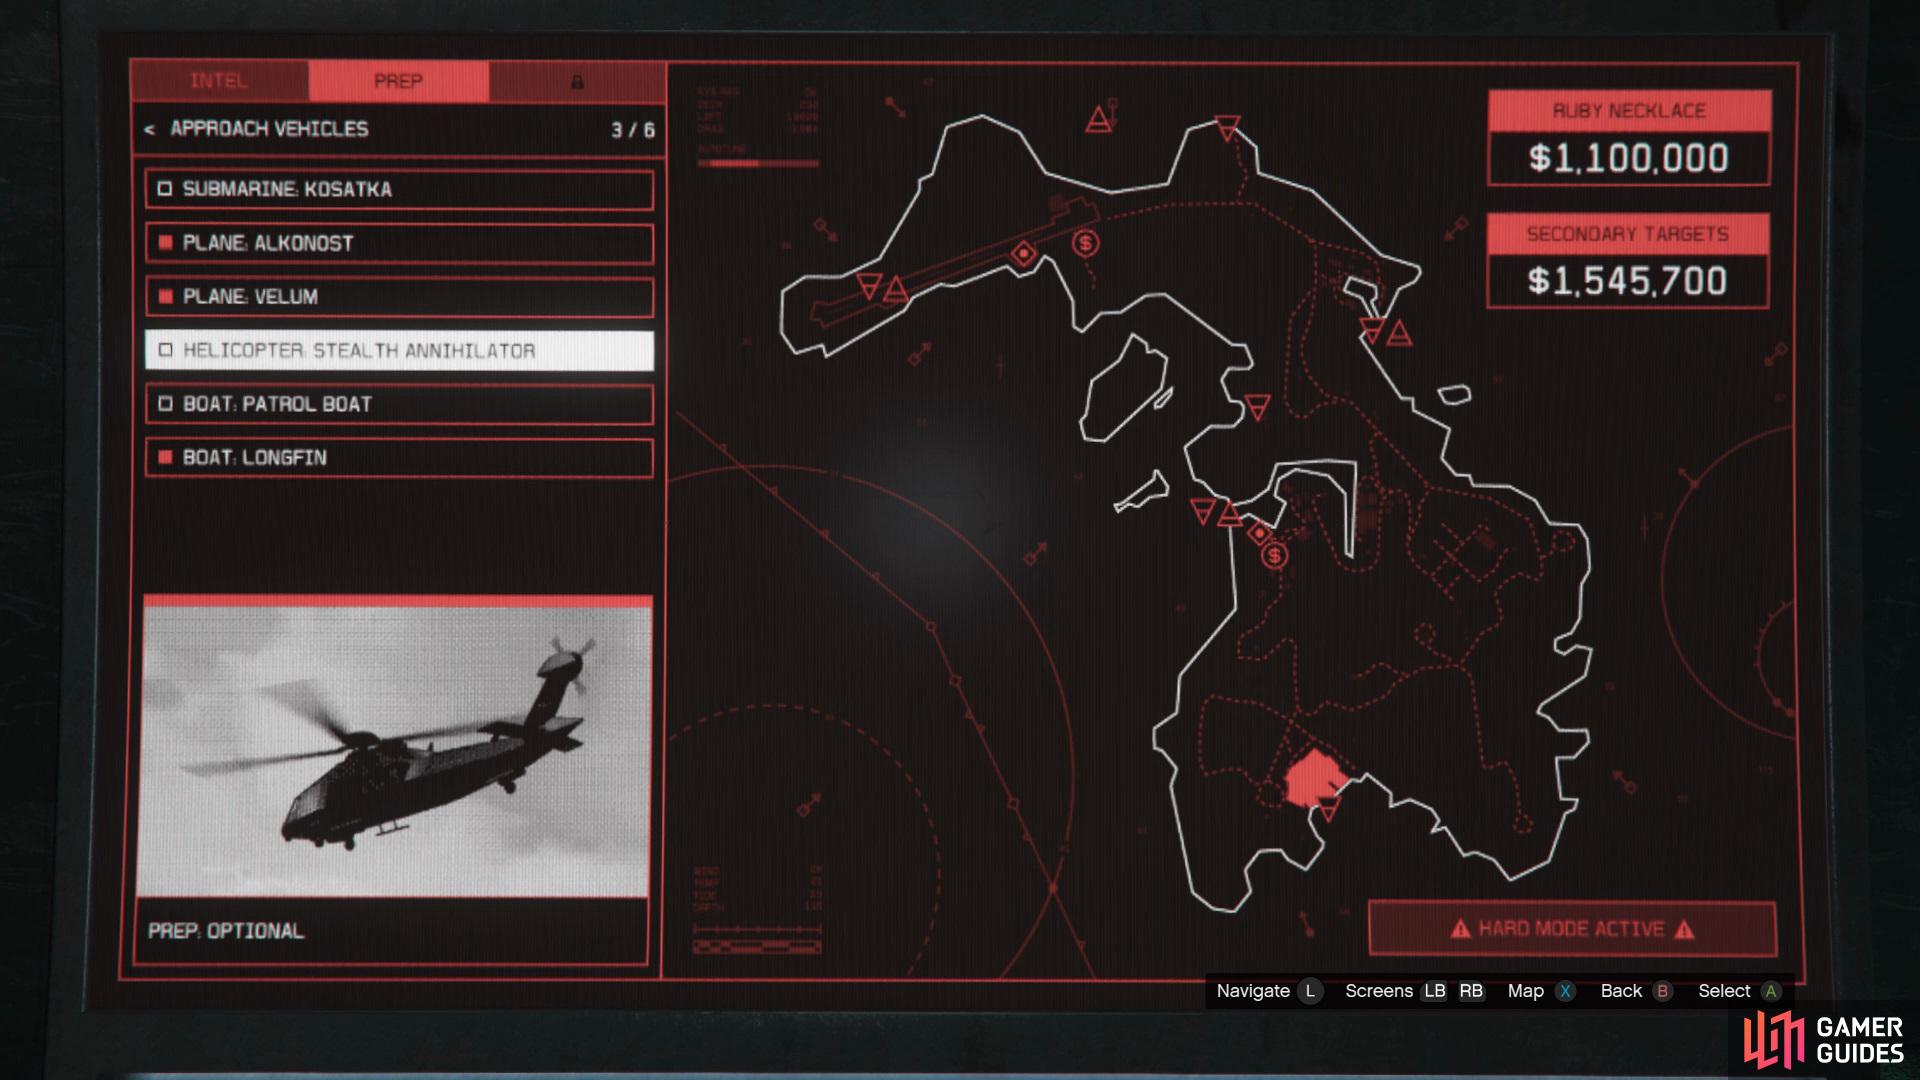 Overview of the Stealth Annihilator mission. 